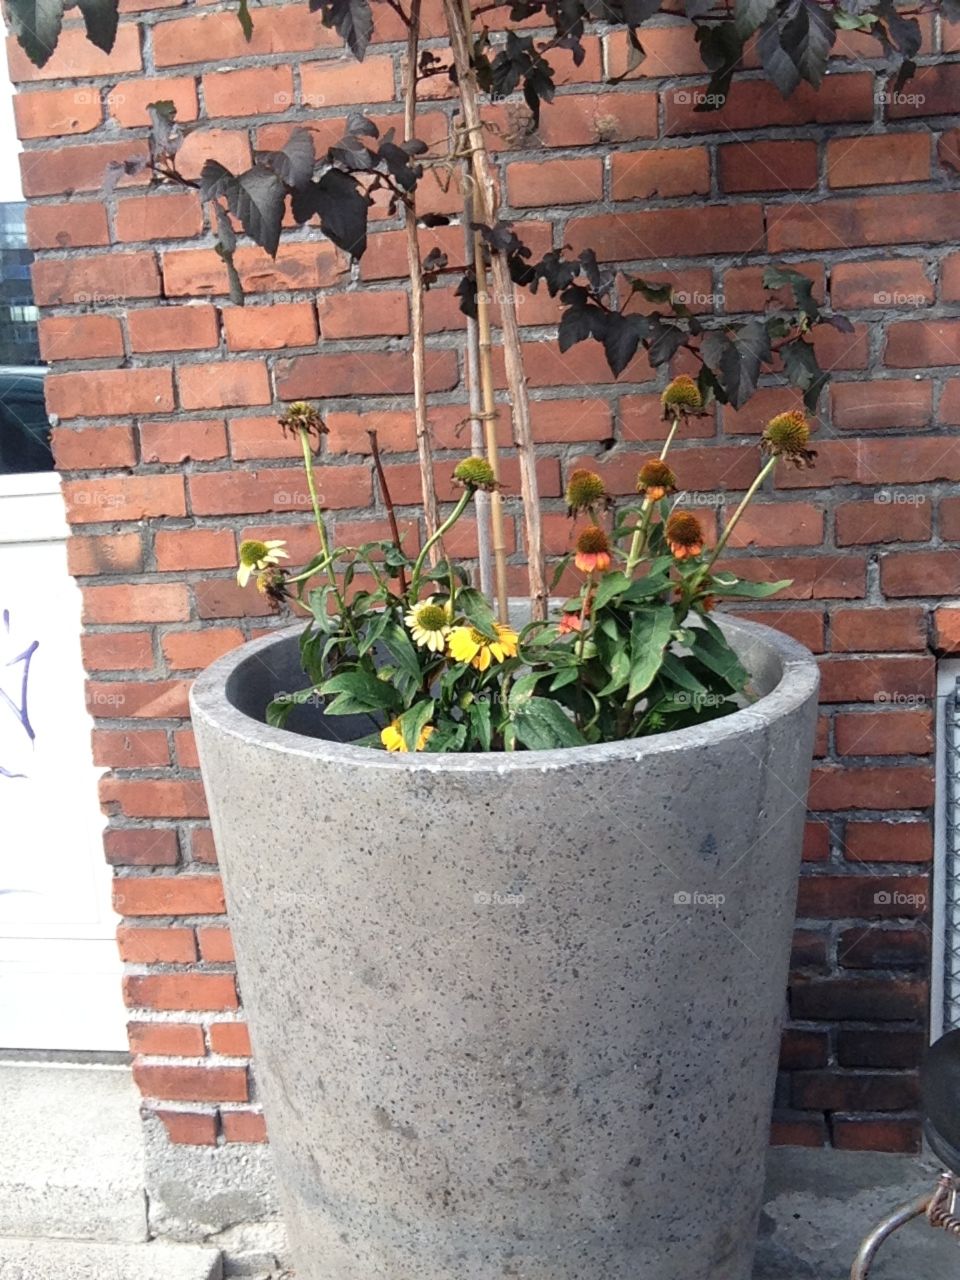 The big pot of flower plant nearby our place very nice,the caretaker of the building is taking care of it everyday.